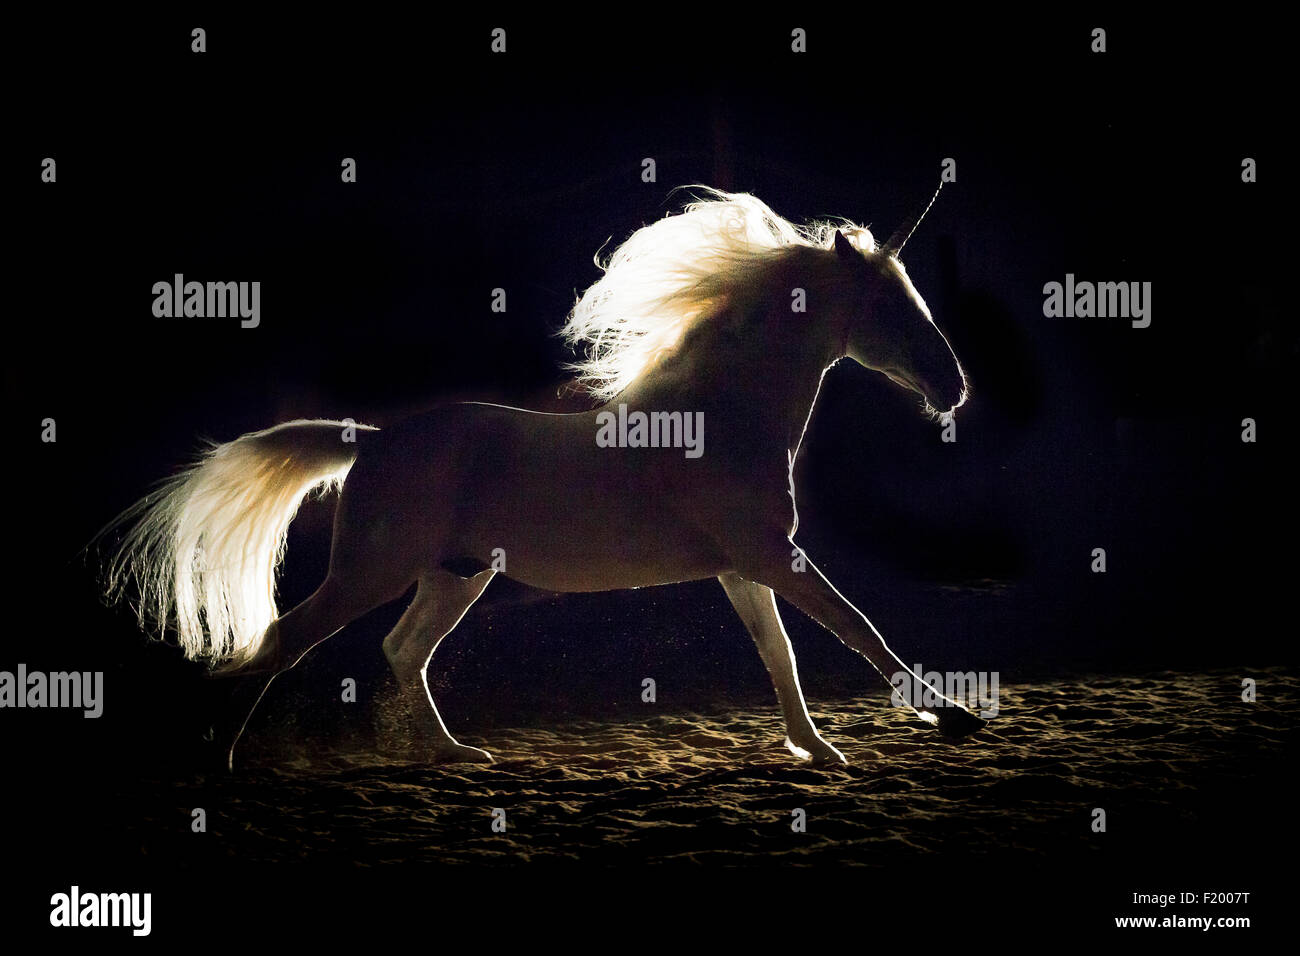 Alter Real Stallion dressed as an unicorn galloping backlight seen against black background Germany Stock Photo